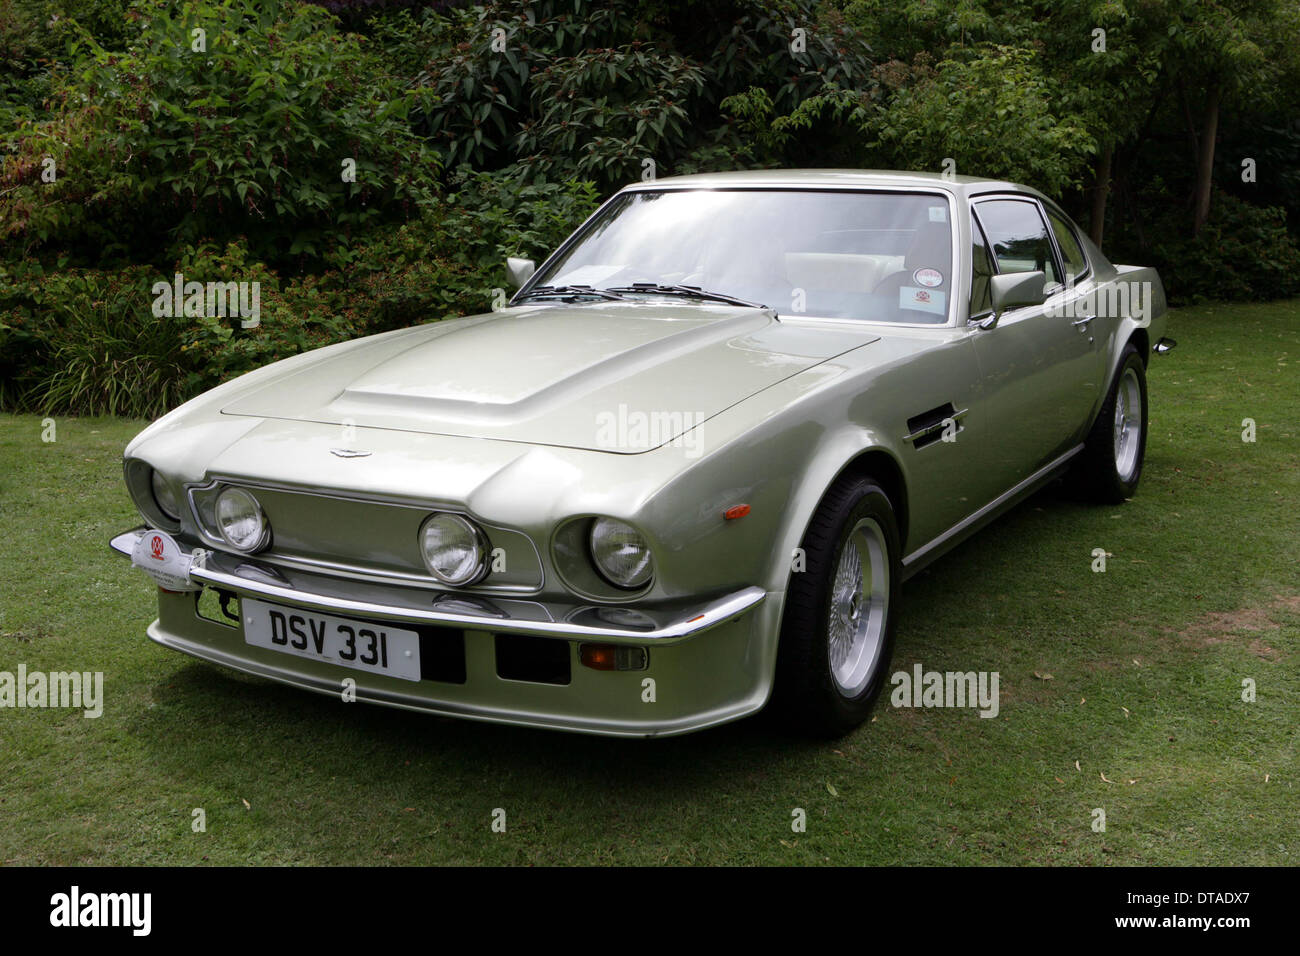 A 1980s Aston Martin V8 Vantage in green at a west country car show in England 2013 Stock Photo